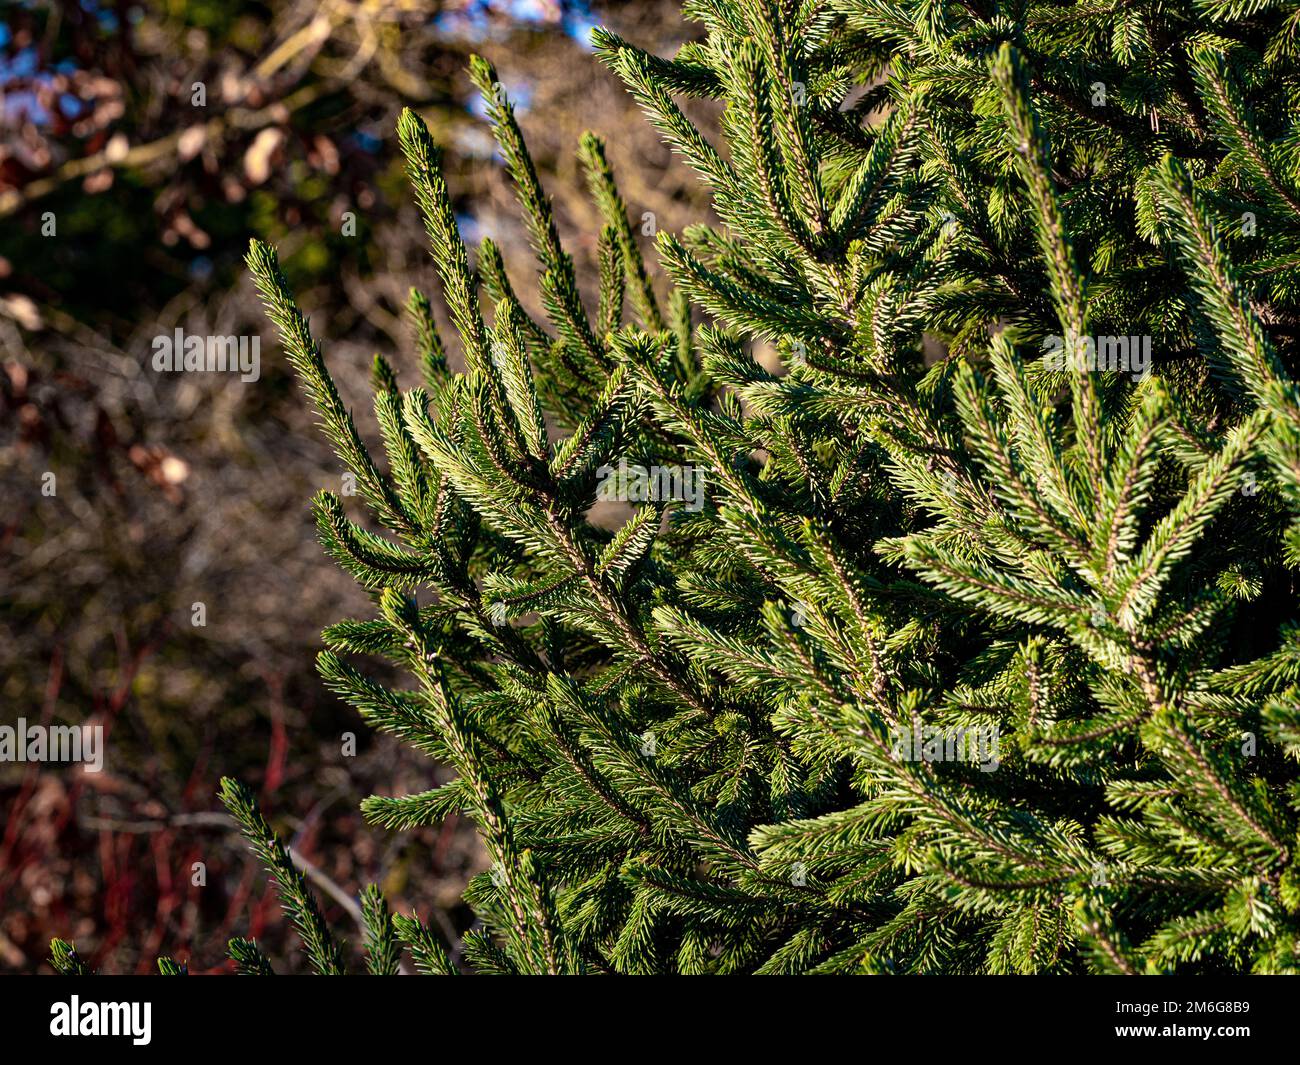 Closeup of a Norway Spruce tree with its needle covered branchlets growing in a UK garden. Stock Photo